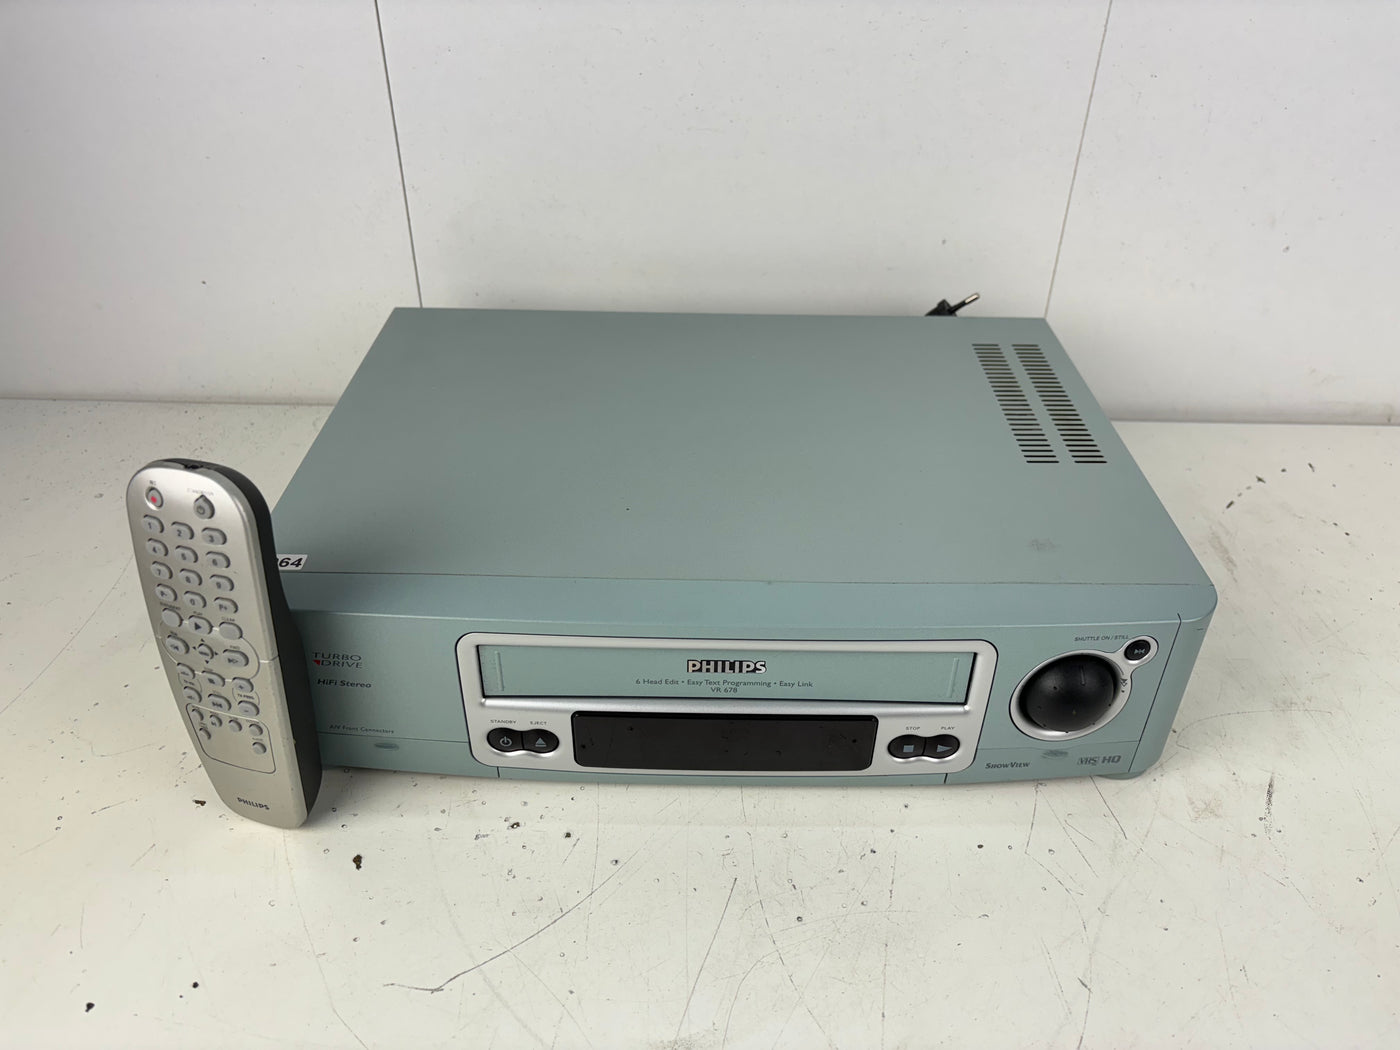 Philips VR678 VHS Videorecorder - With remote